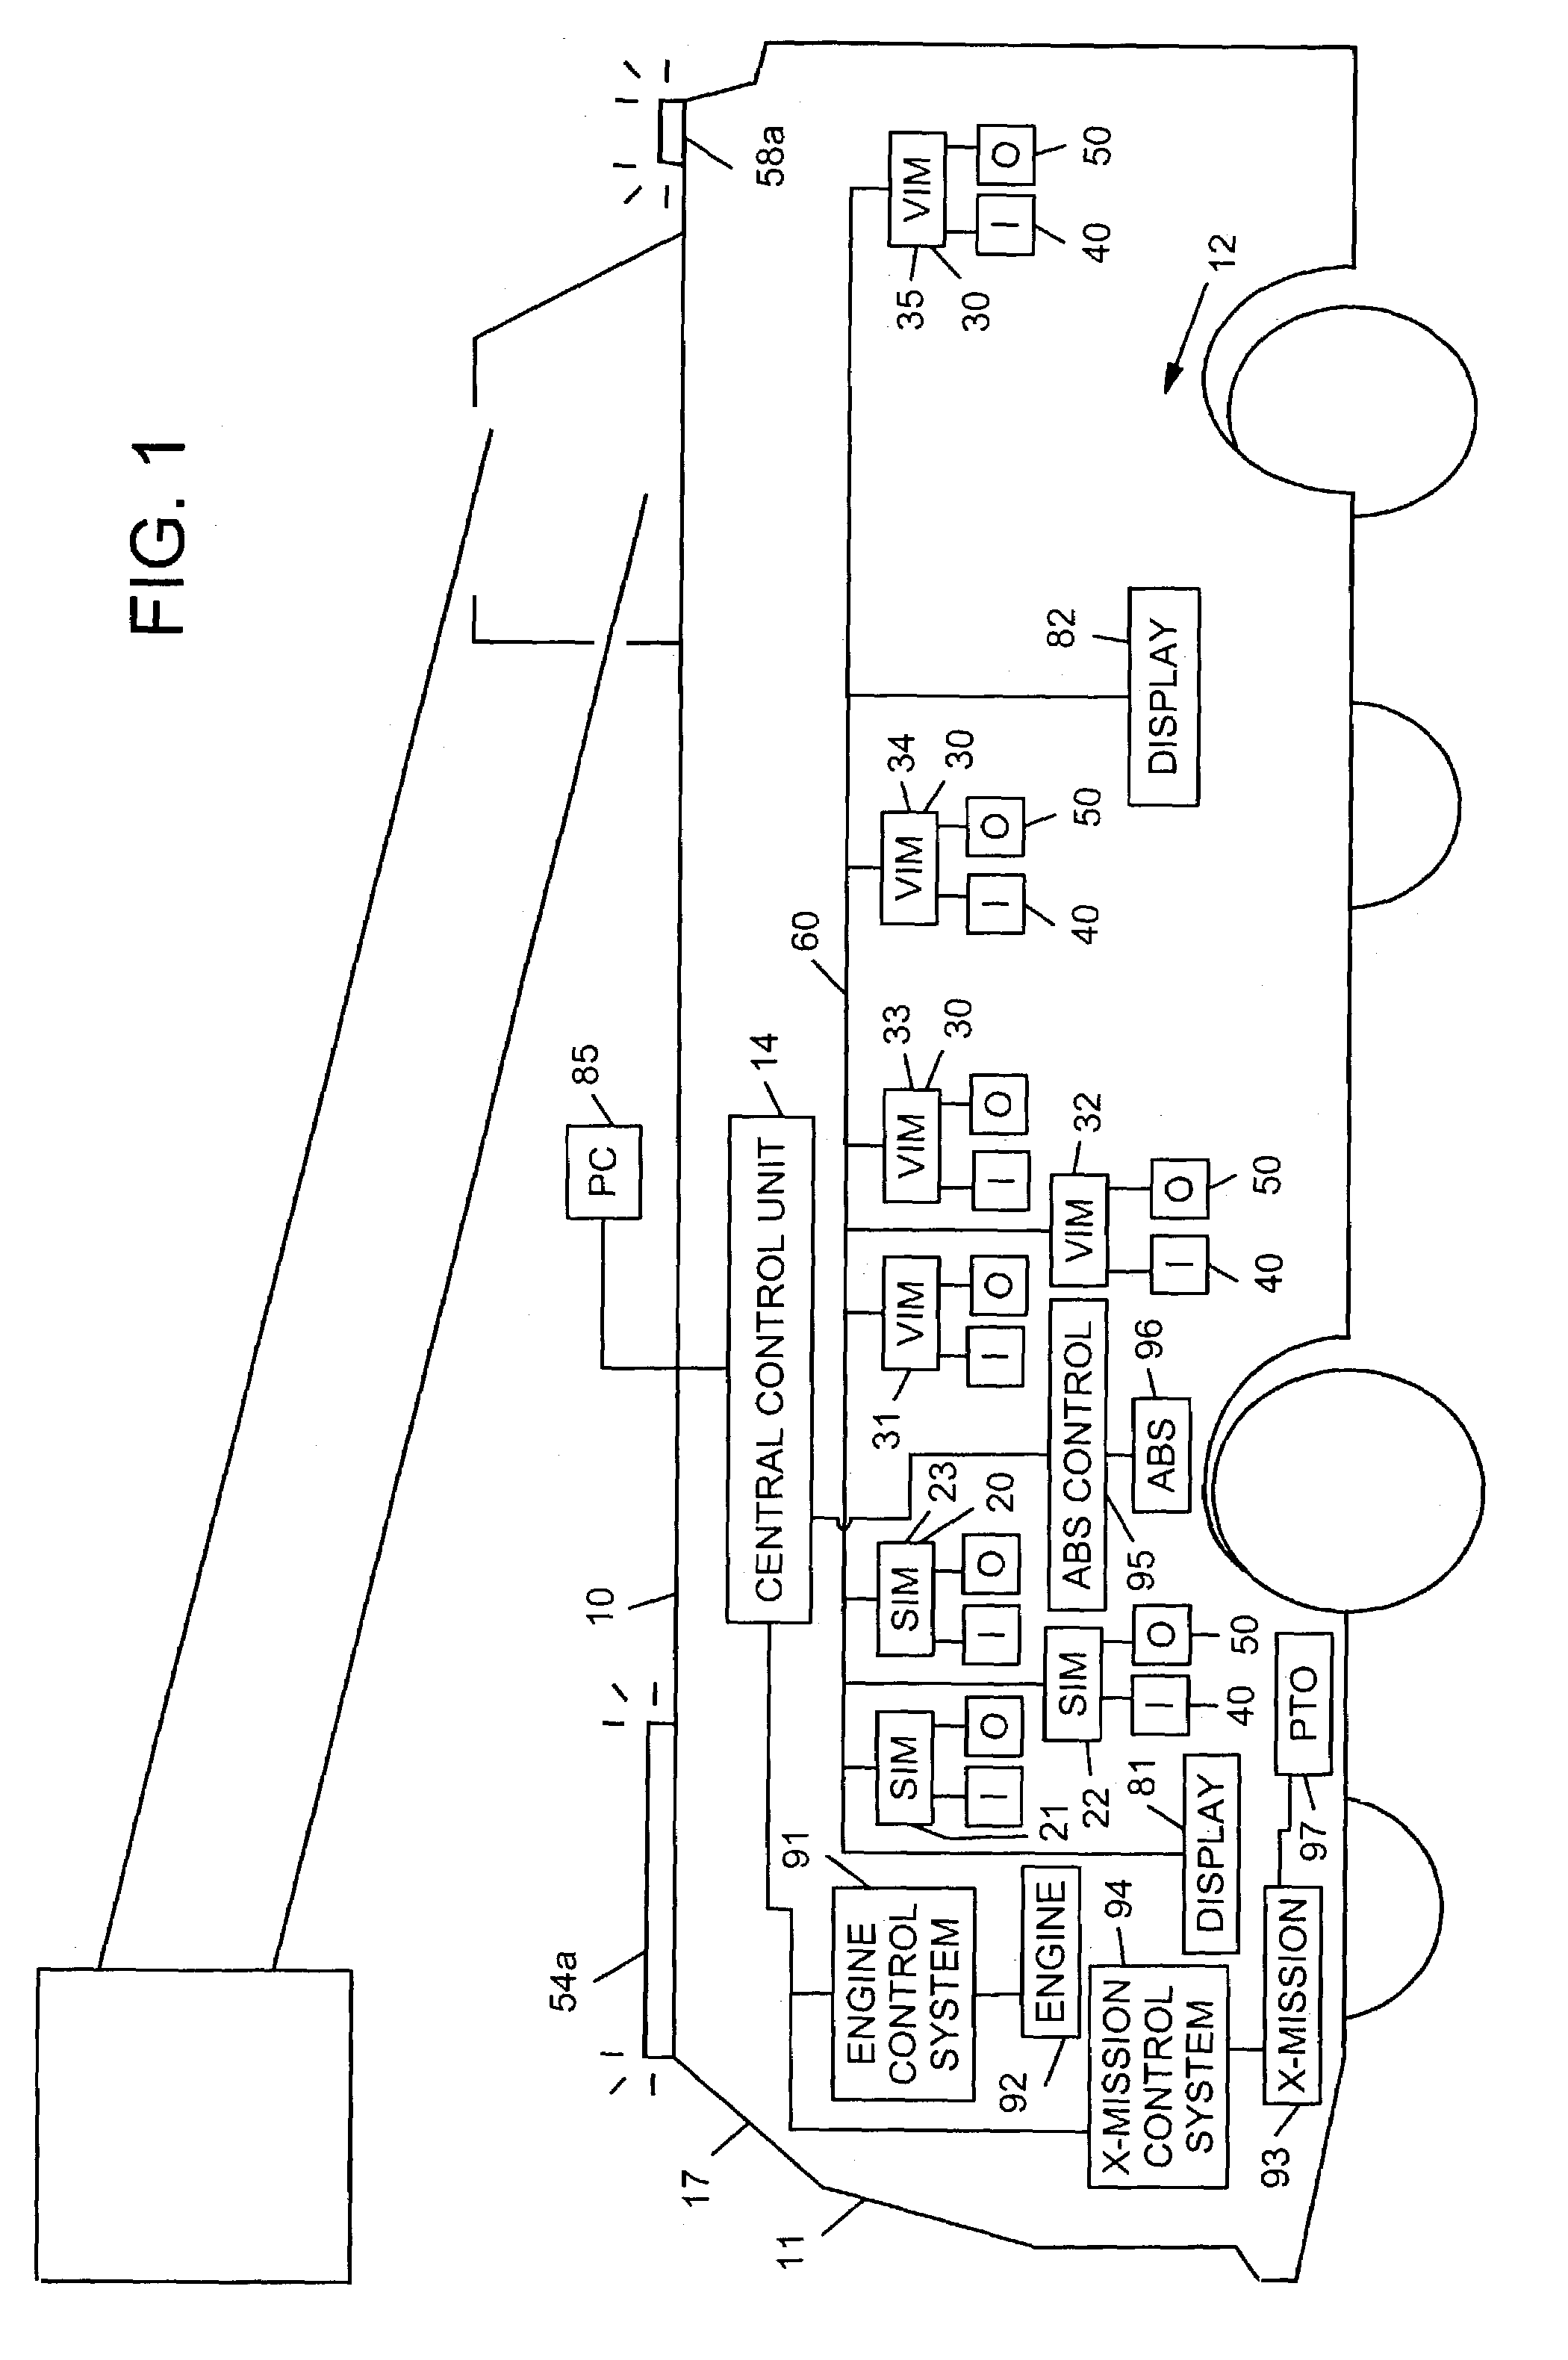 Turret deployment system and method for a fire fighting vehicle